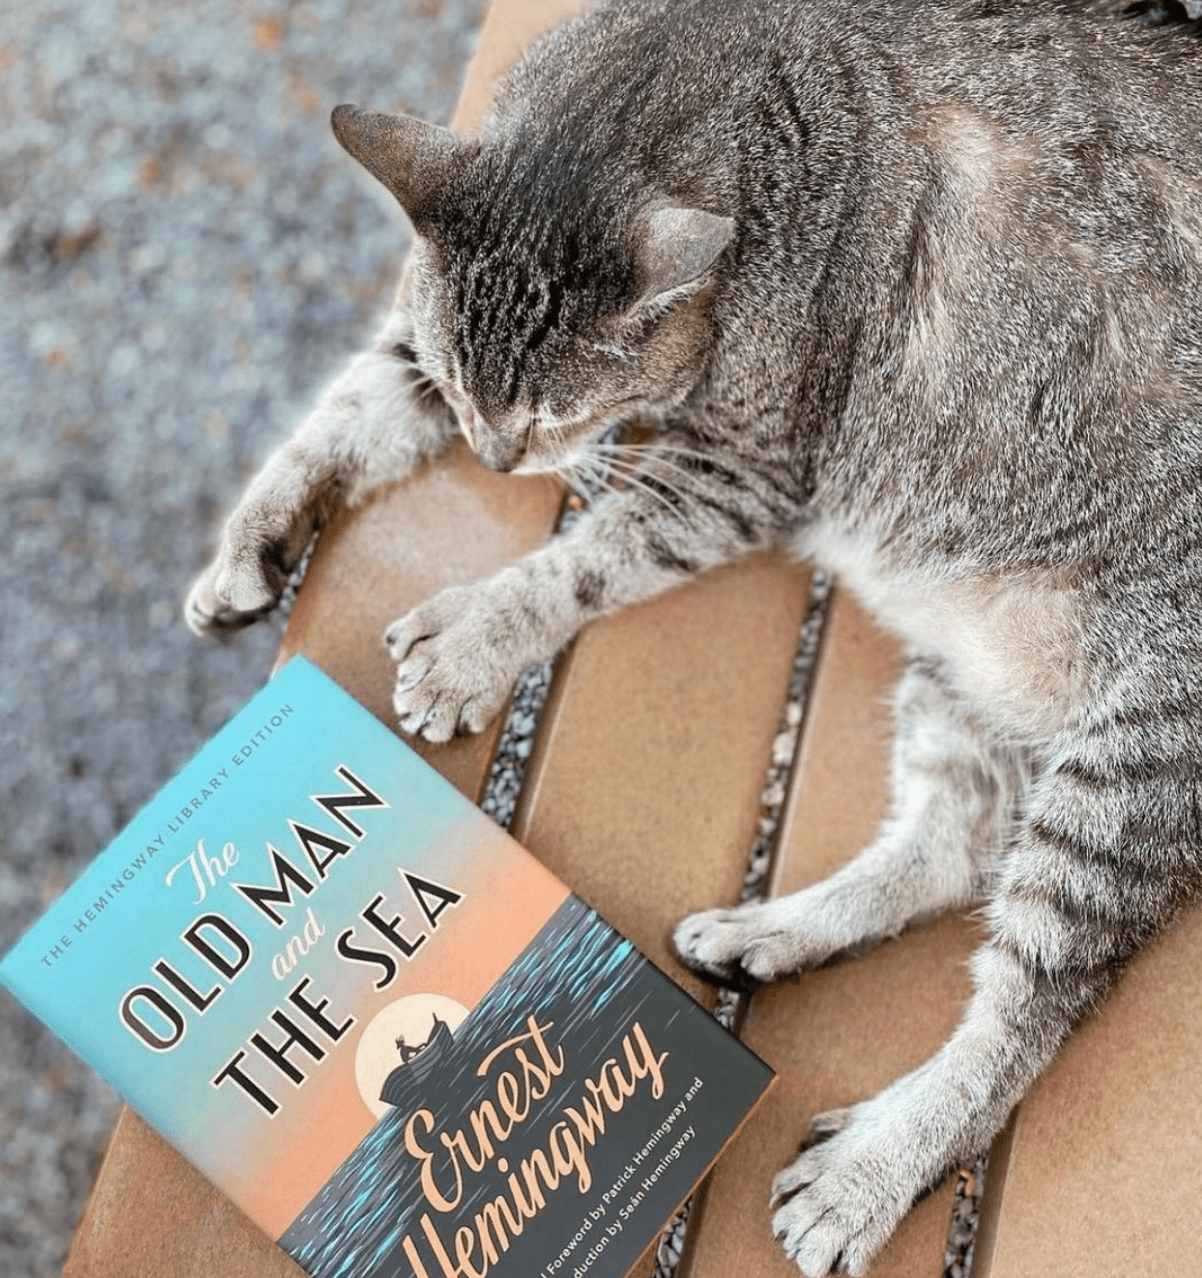 Hemingway Cat in Key West with a copy of The Old Man and the Sea